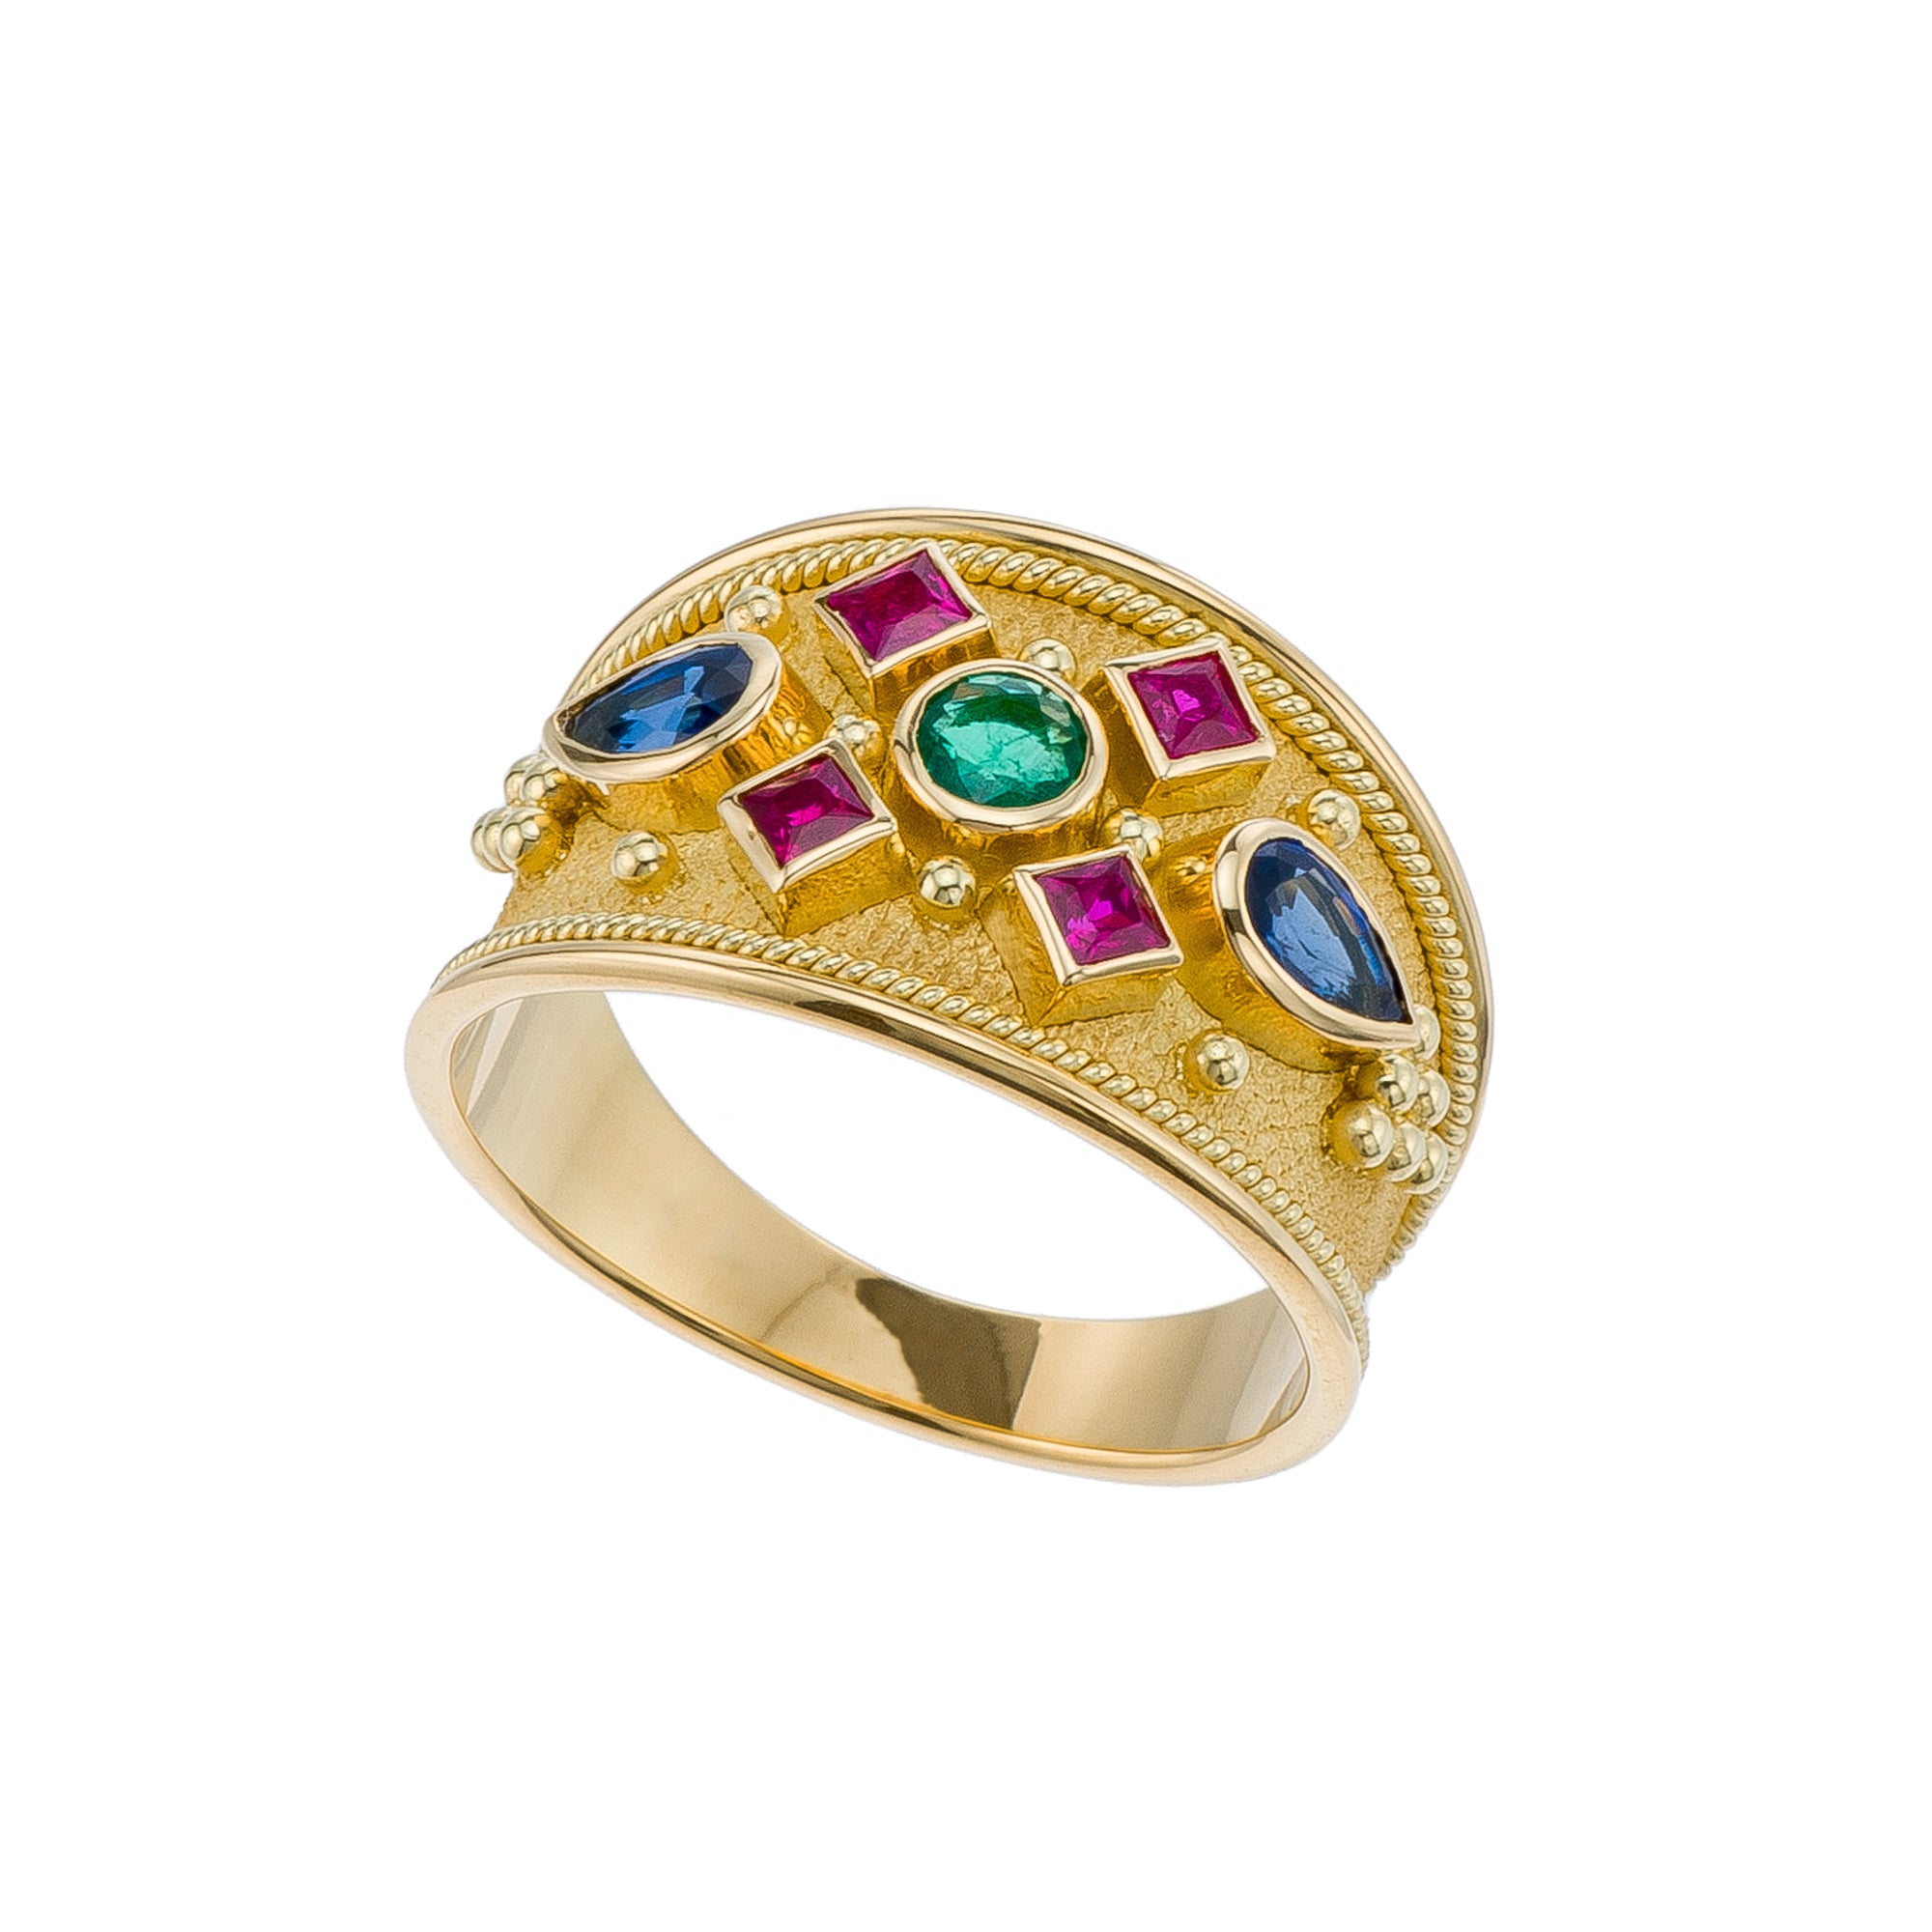 Gold Byzantine Ring with Emerald Rubies and Sapphires Odysseus Jewelry